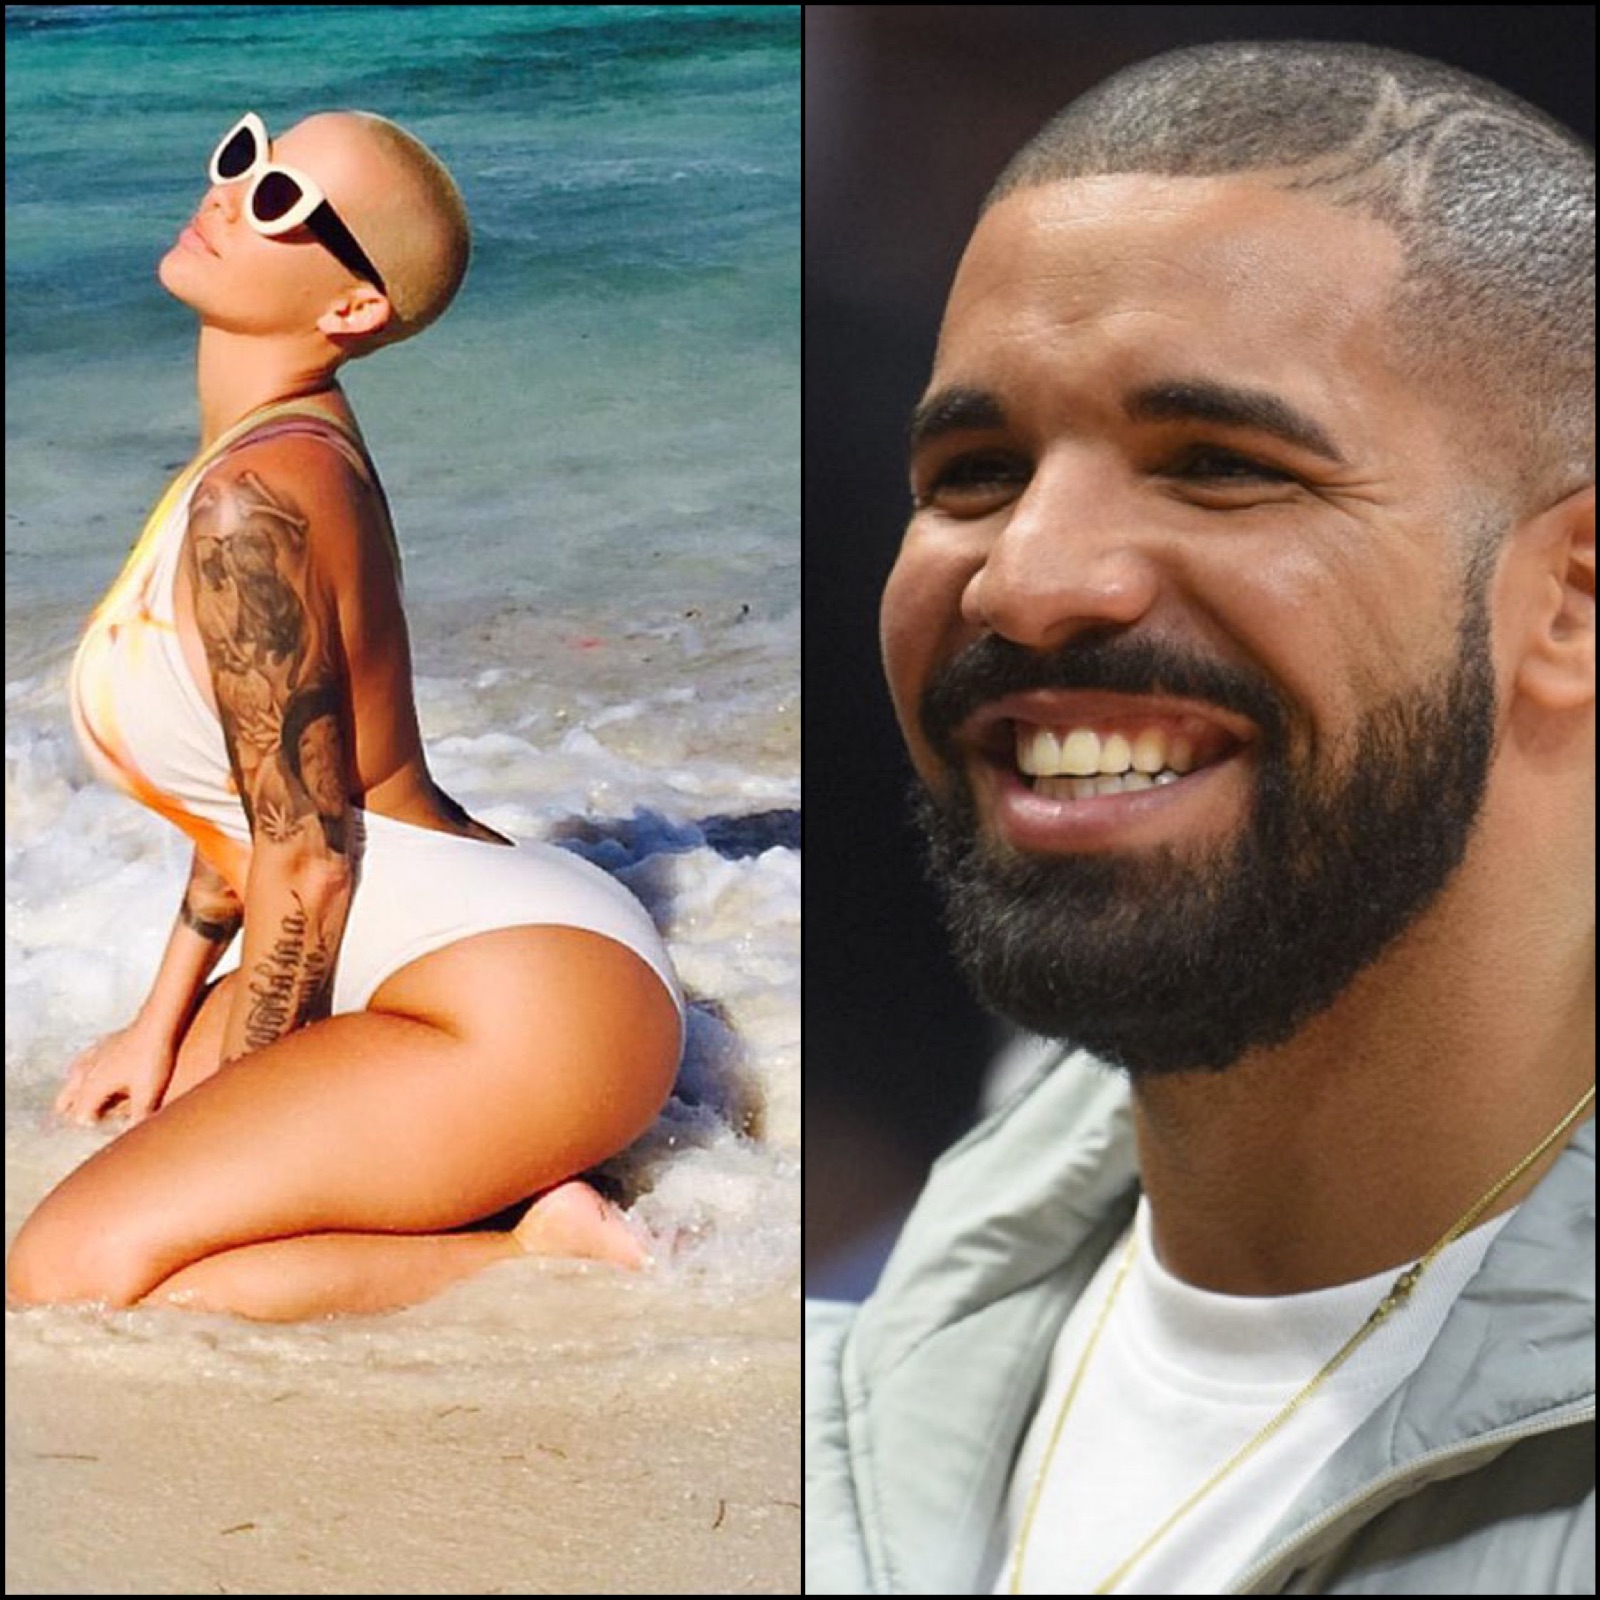 bailey jeanette recommends amber rose sextaoe pic